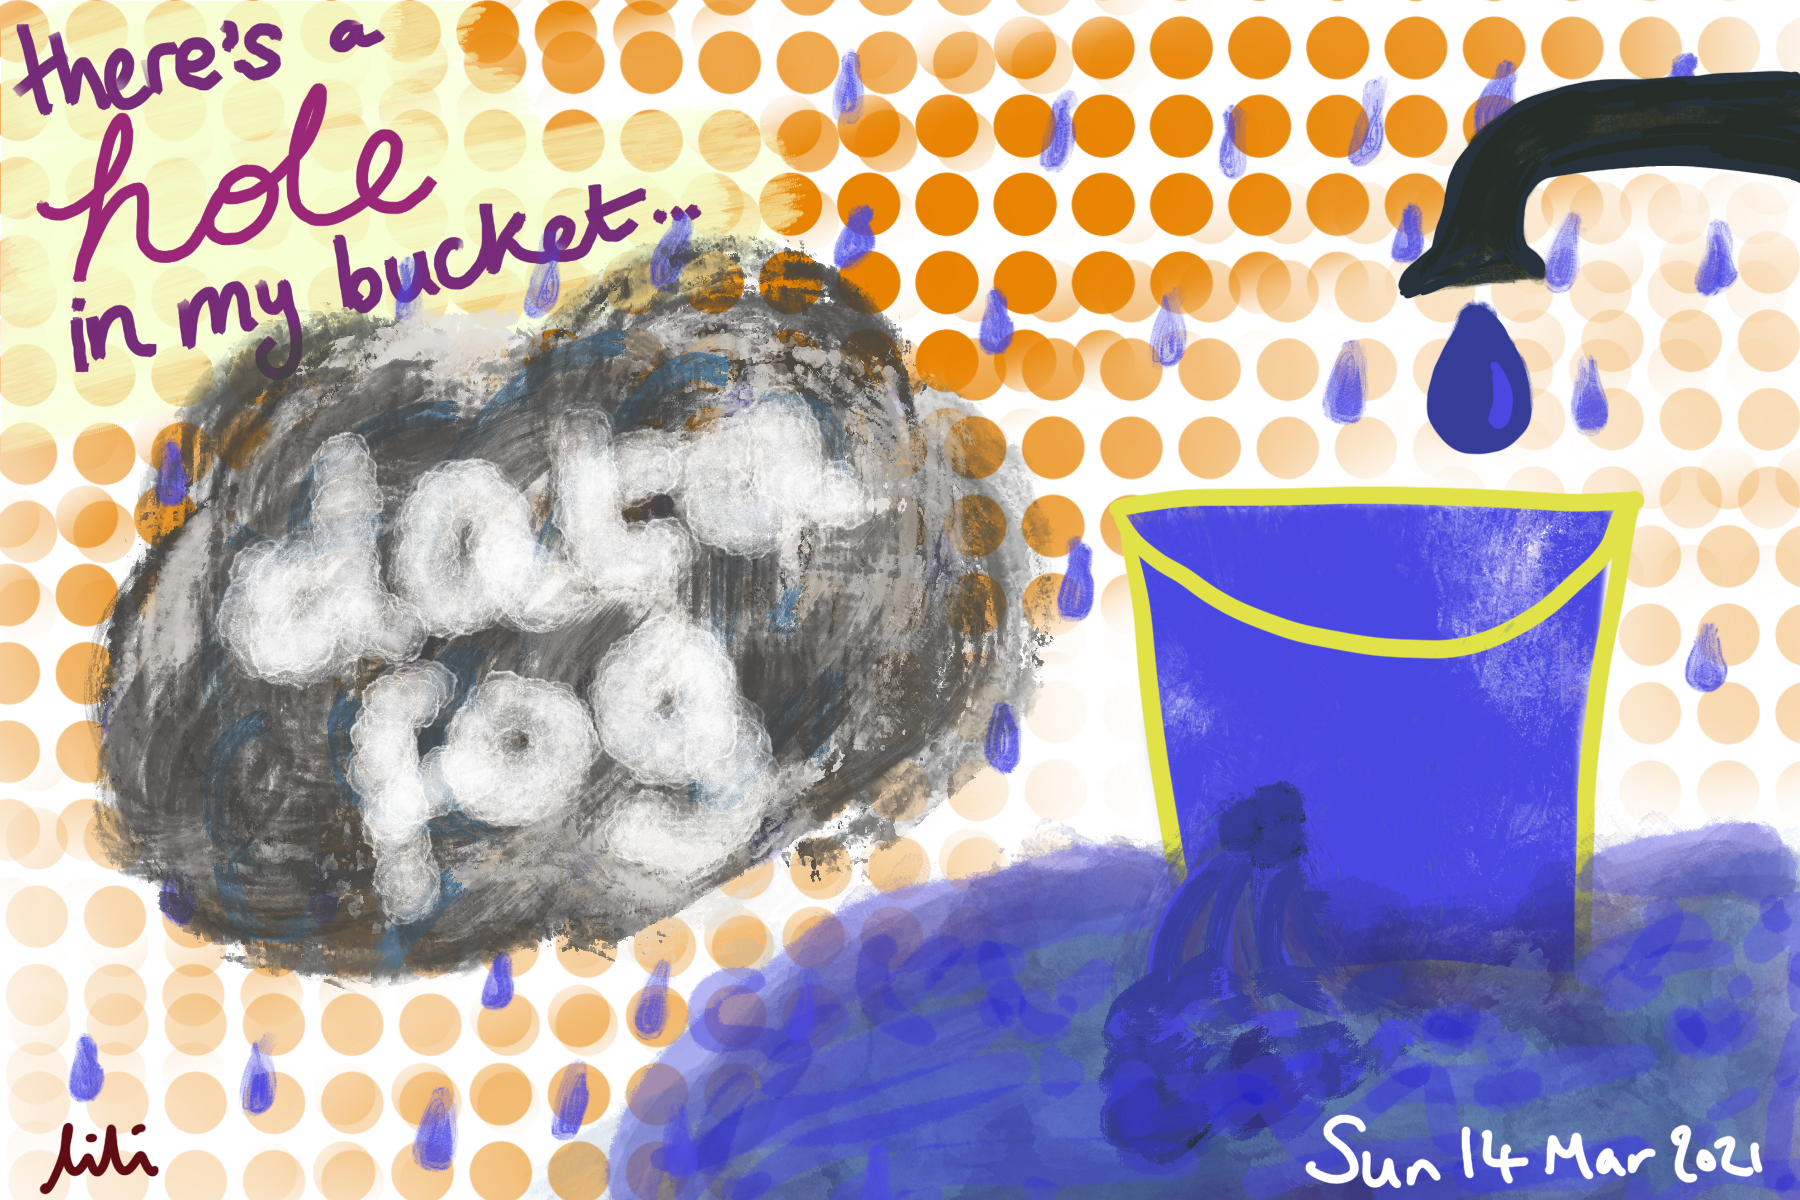 It's raining, and a tap is dripping water into a bucket that is both full and leaking from a hole. It is sat in a puddle of water. There's a grey cloud labelled 'data fog' and the words 'there's a hole in my bucket'. Drawing.